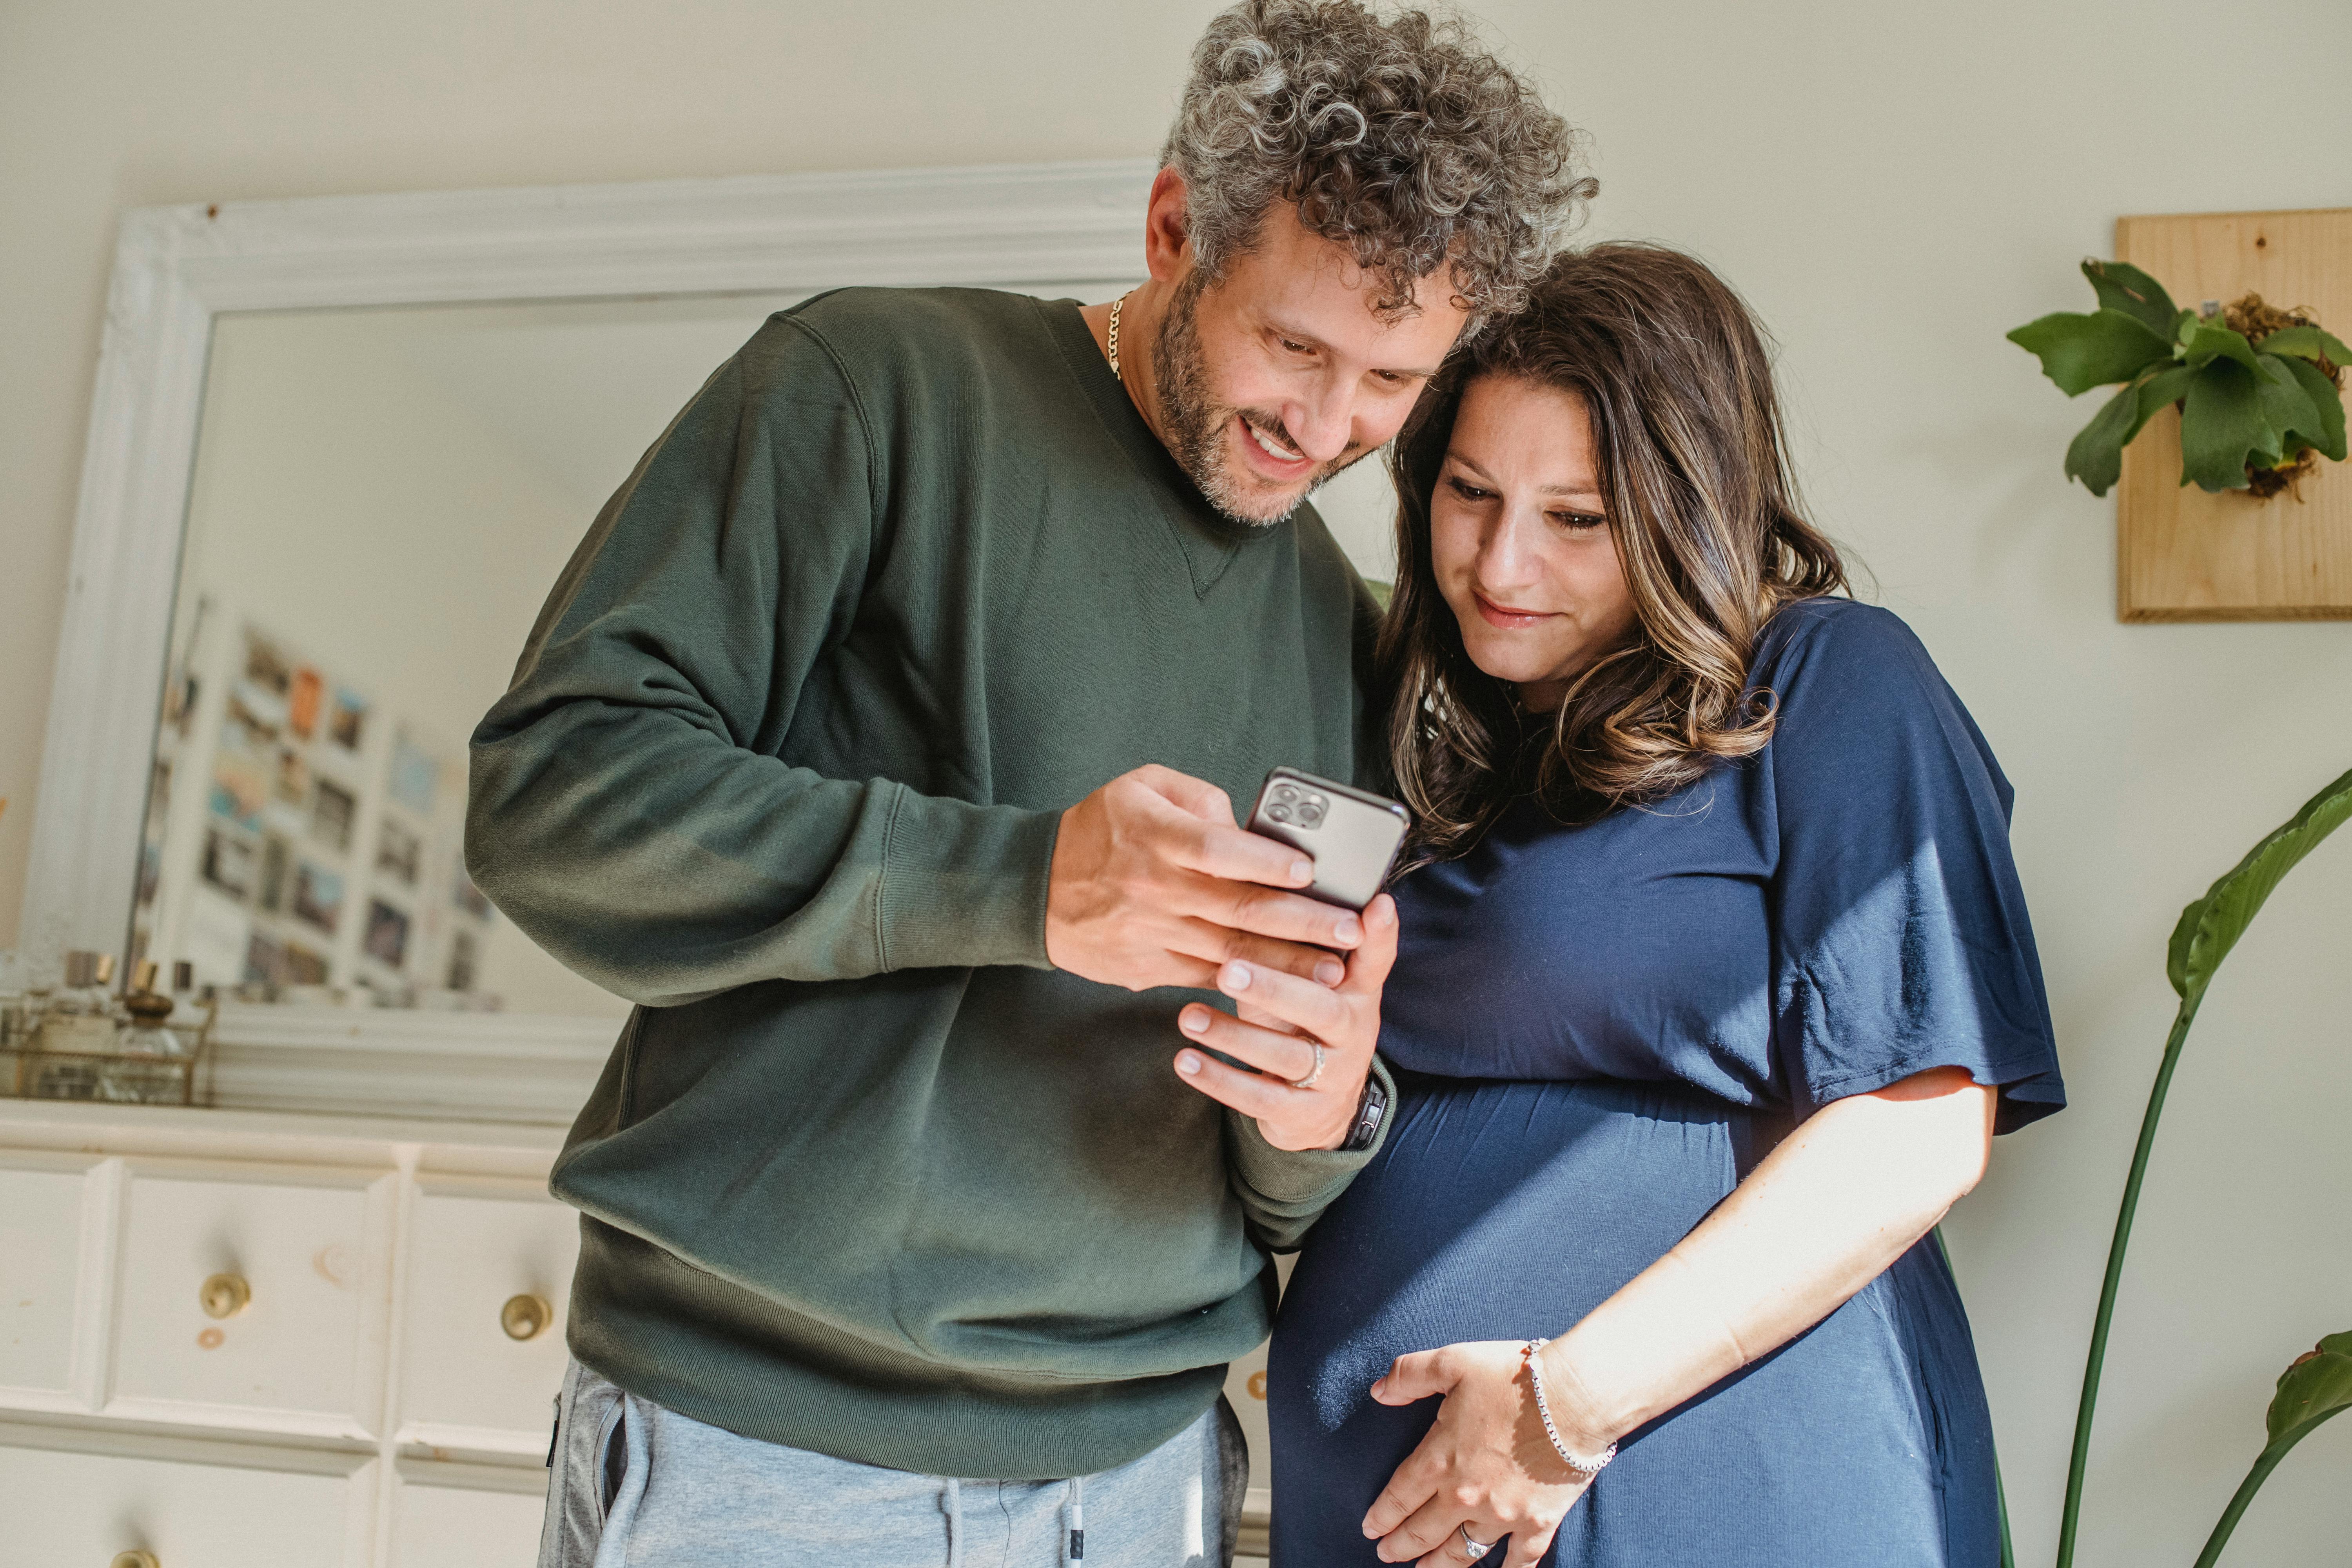 Pregnant woman and man watching smartphone together at home. | Photo: Pexels